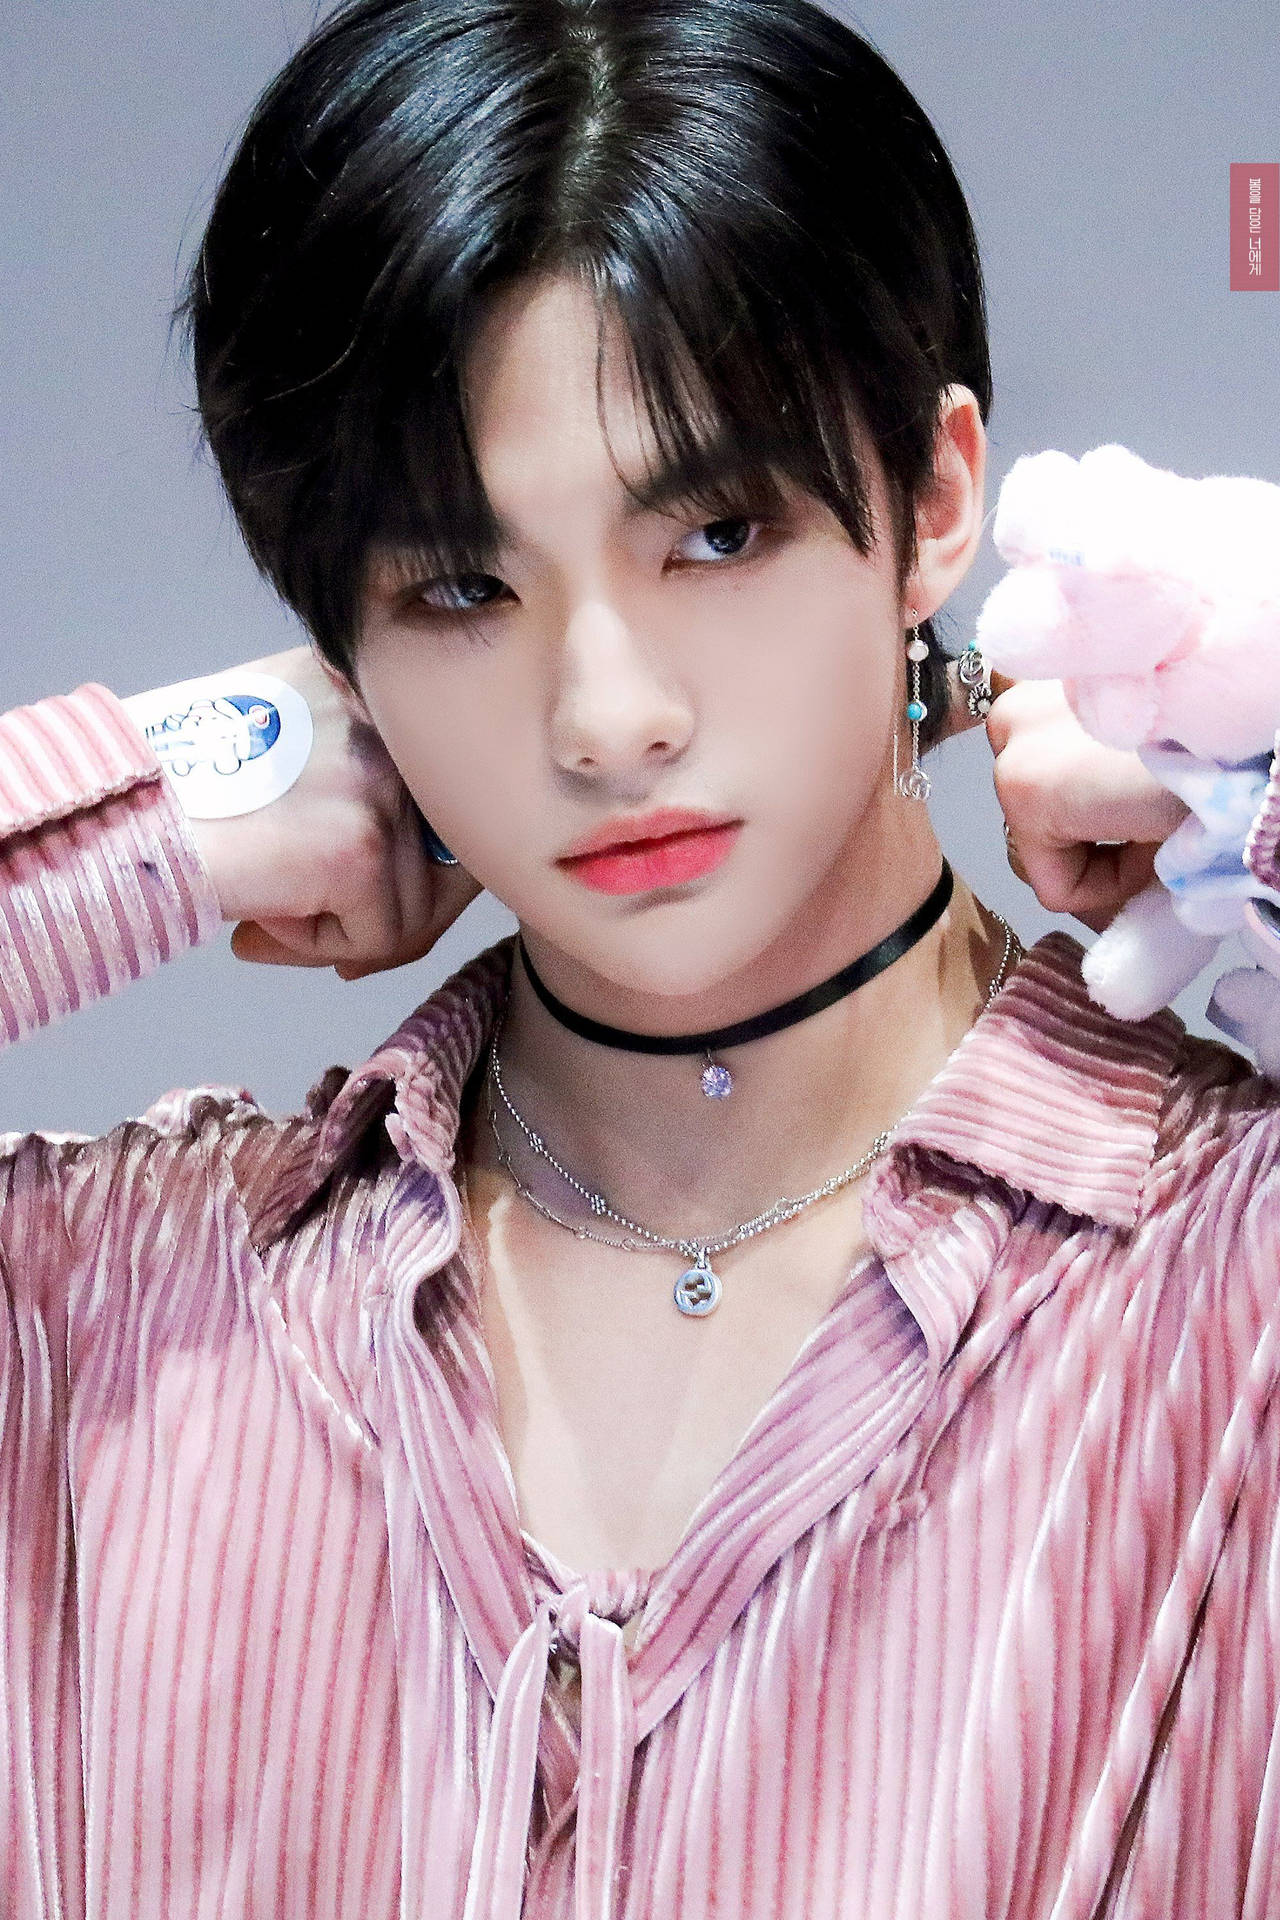 Hyunjin Of Stray Kids Marks The Start Of An Exciting Career! Background